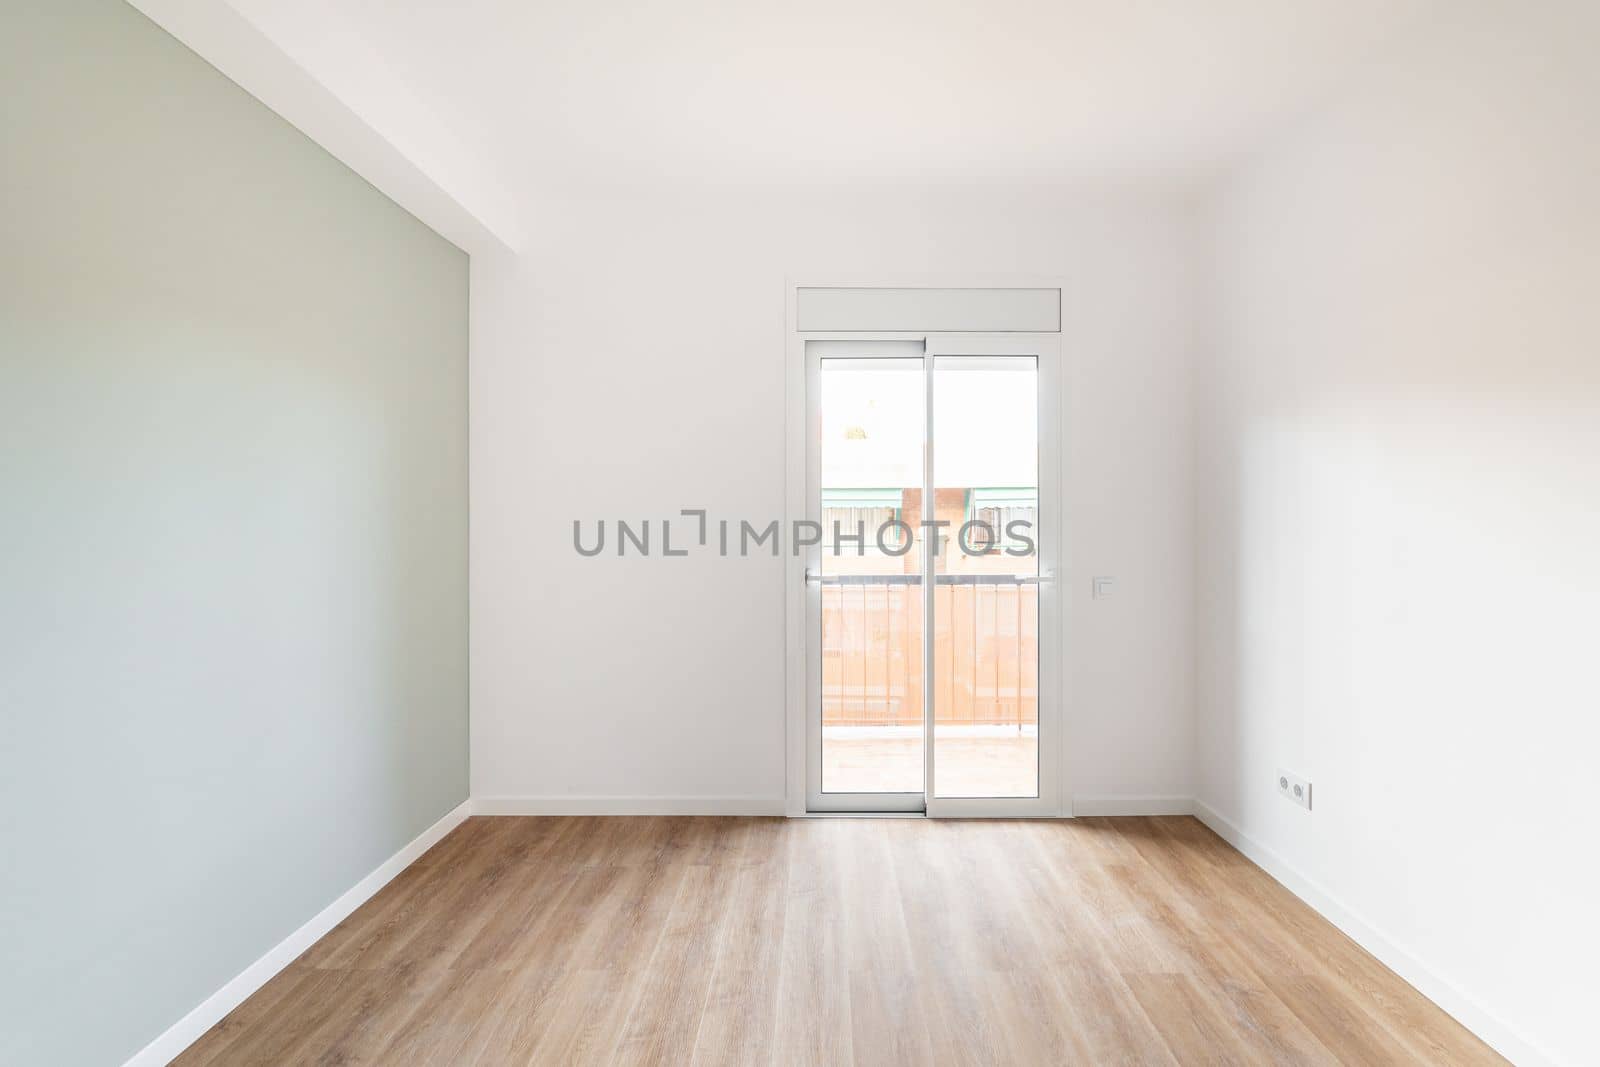 An empty bright room for living with access to balcony and view of neighboring house. Room has transparent glass door with access to balcony. Gray wall and wooden laminate floor create cozy feeling. by apavlin